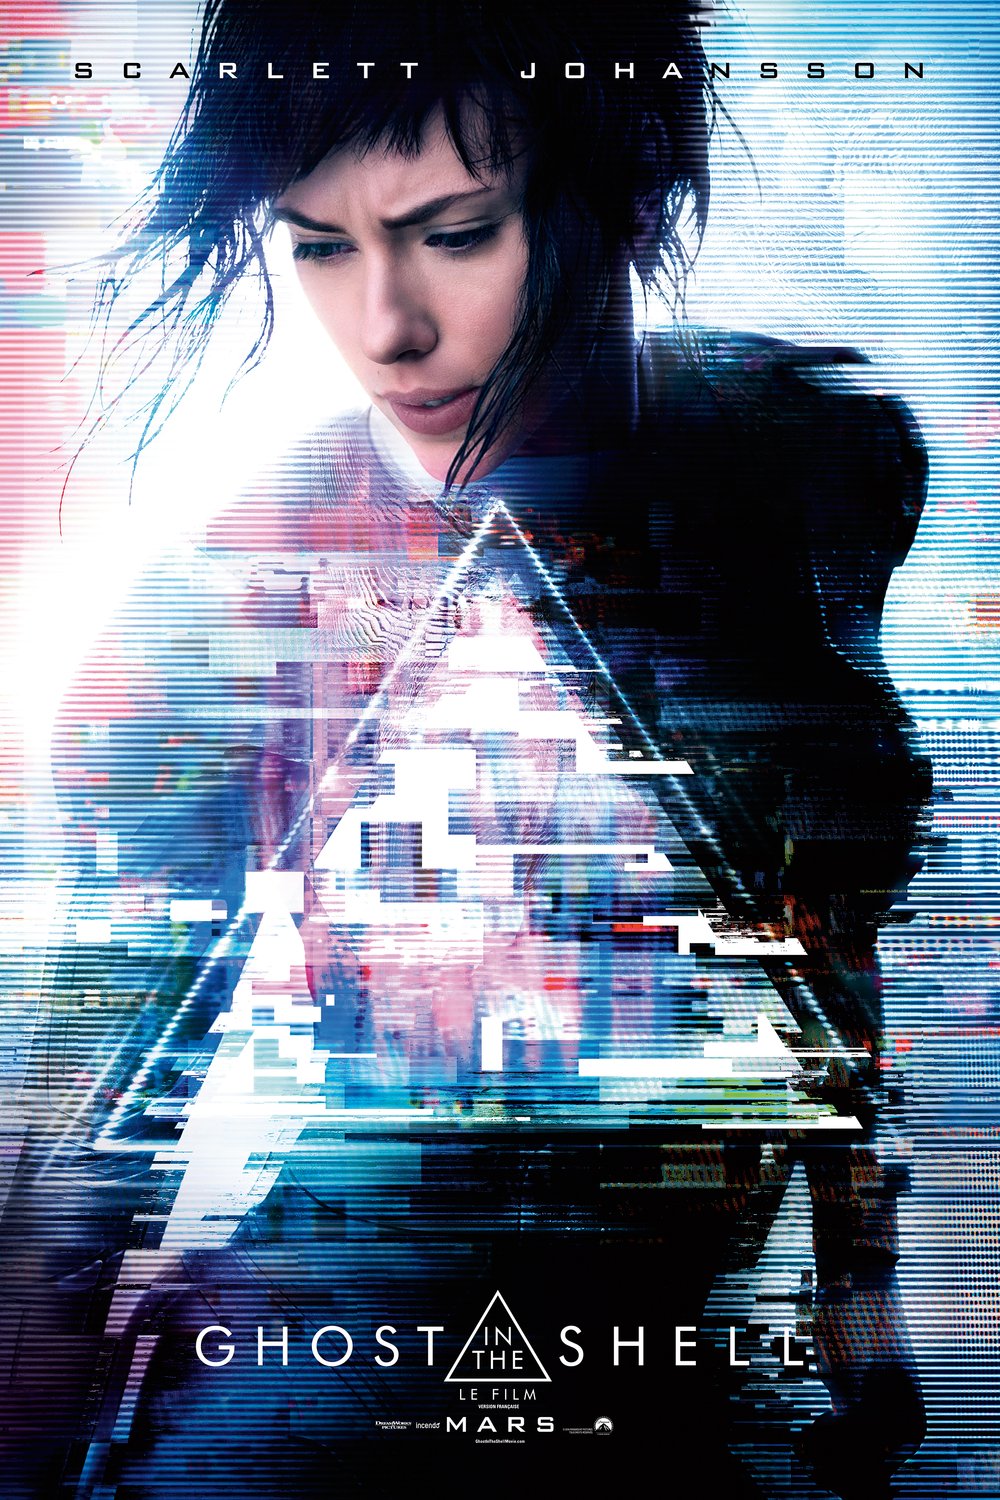 Poster of the movie Ghost in the Shell: Le film